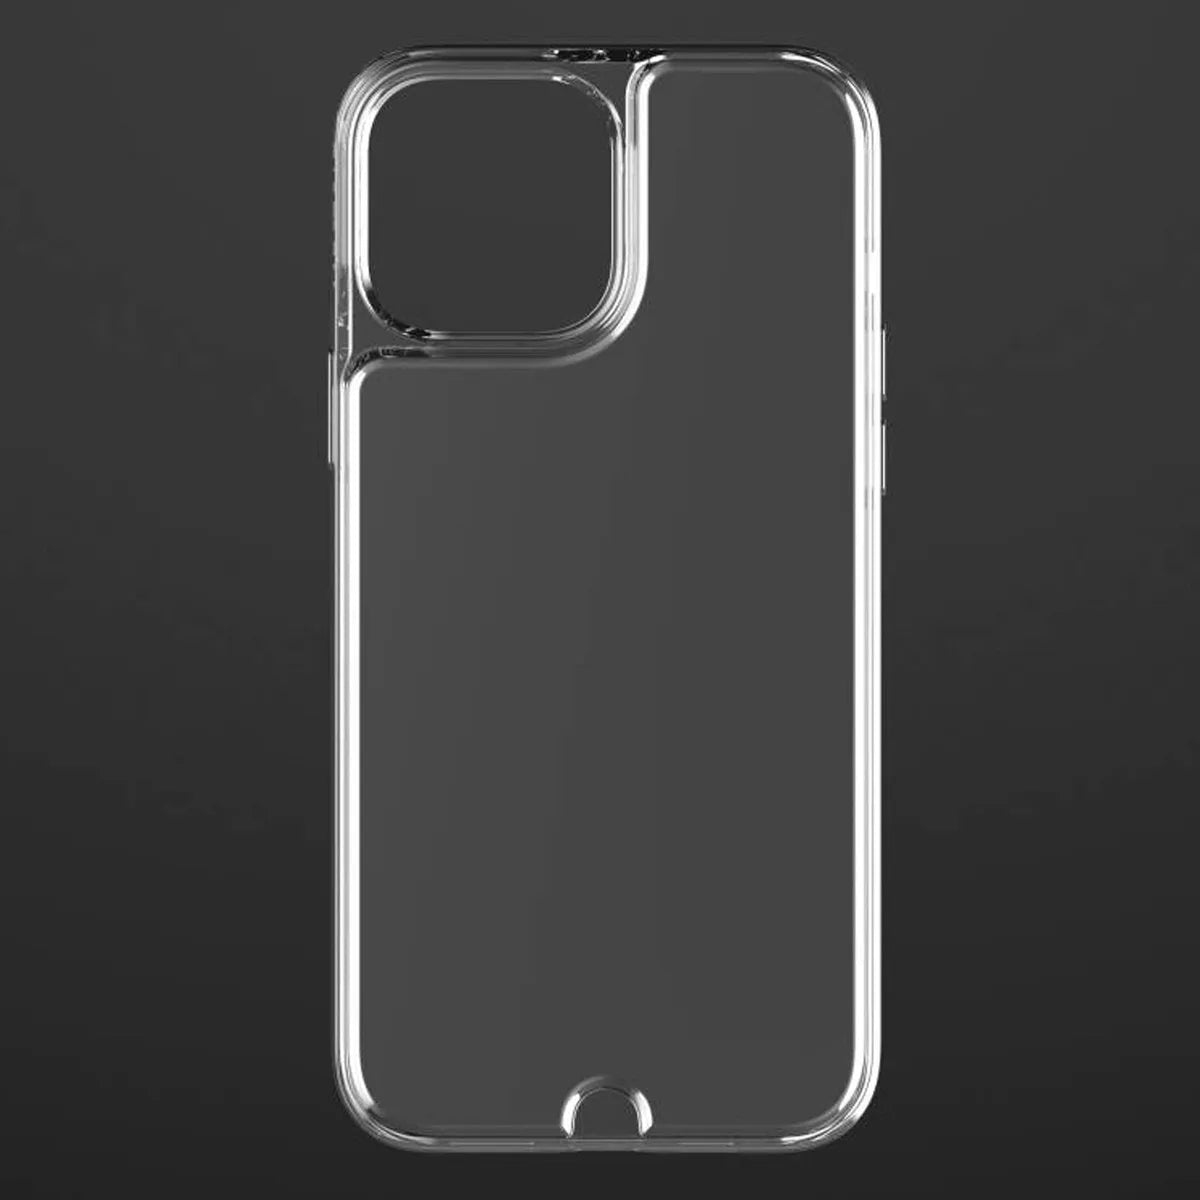 Fortress Fortress Fortress Infinite Glass Case for iPhone 13  Infinite Glass 